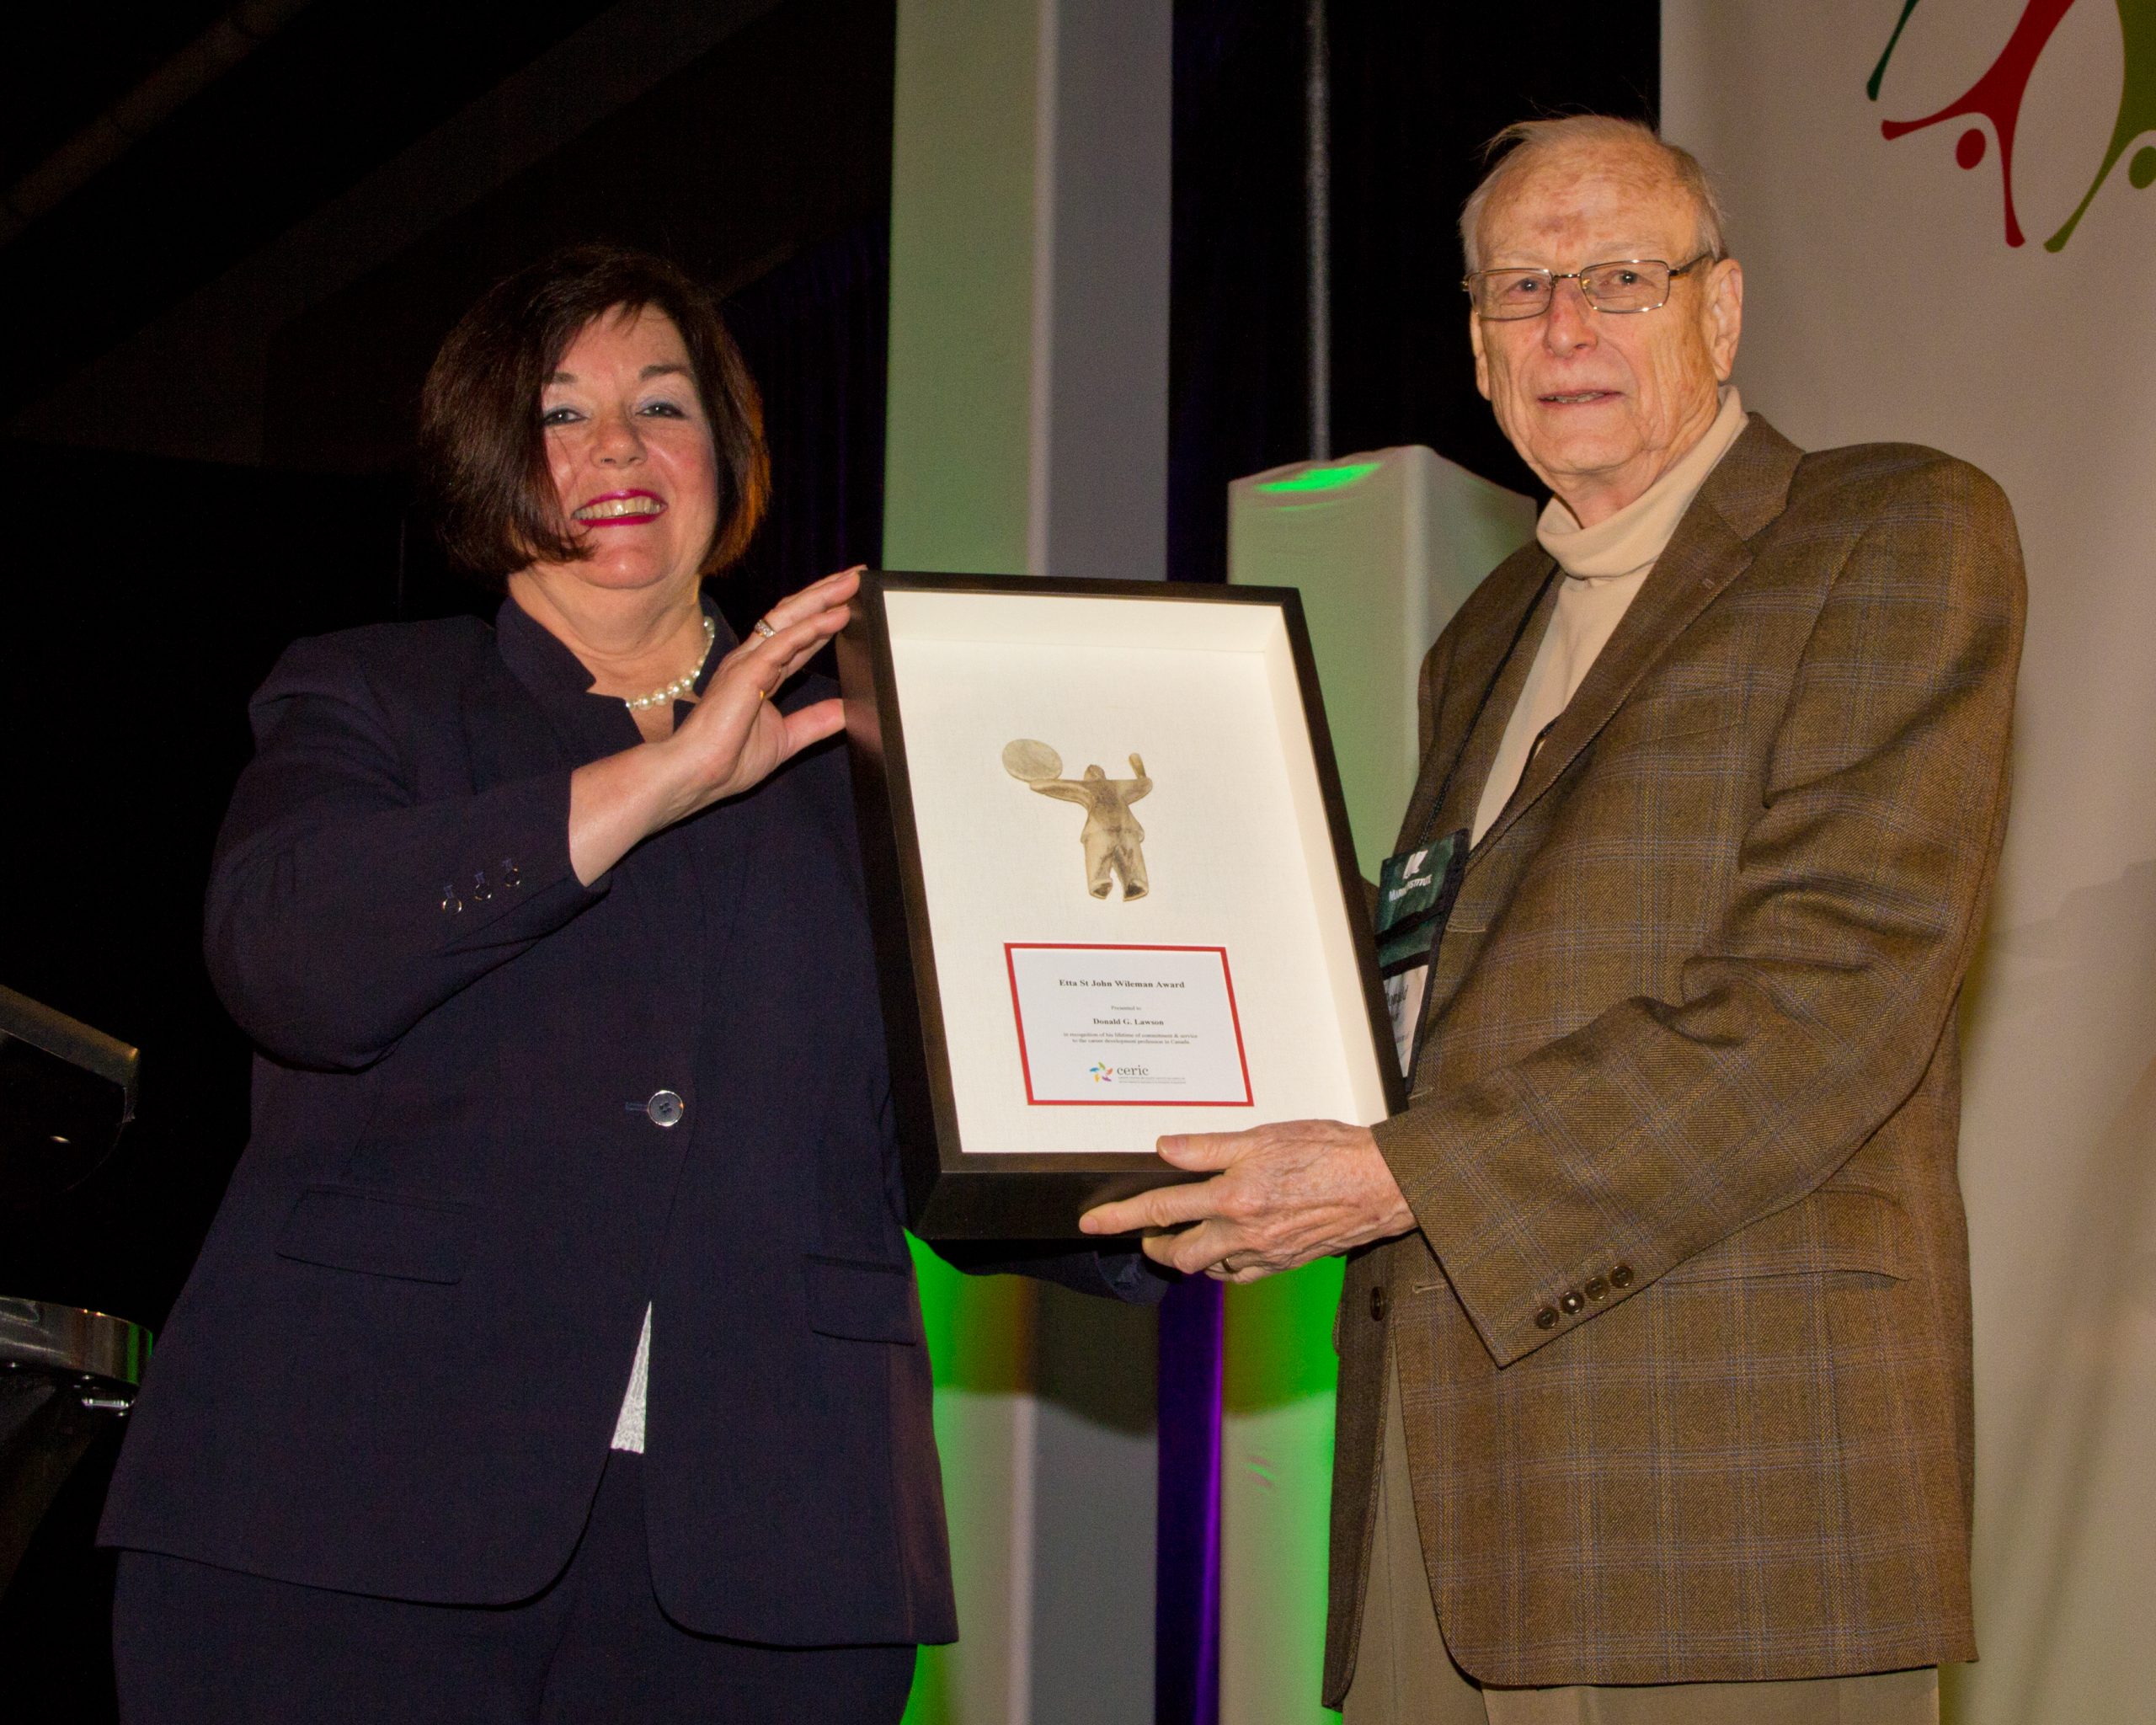 Donald Lawson receives the Etta St John Wileman Award for Lifetime Achievement in career development from CERIC Board Chair Jan Basso during the Cannexus15 conference.